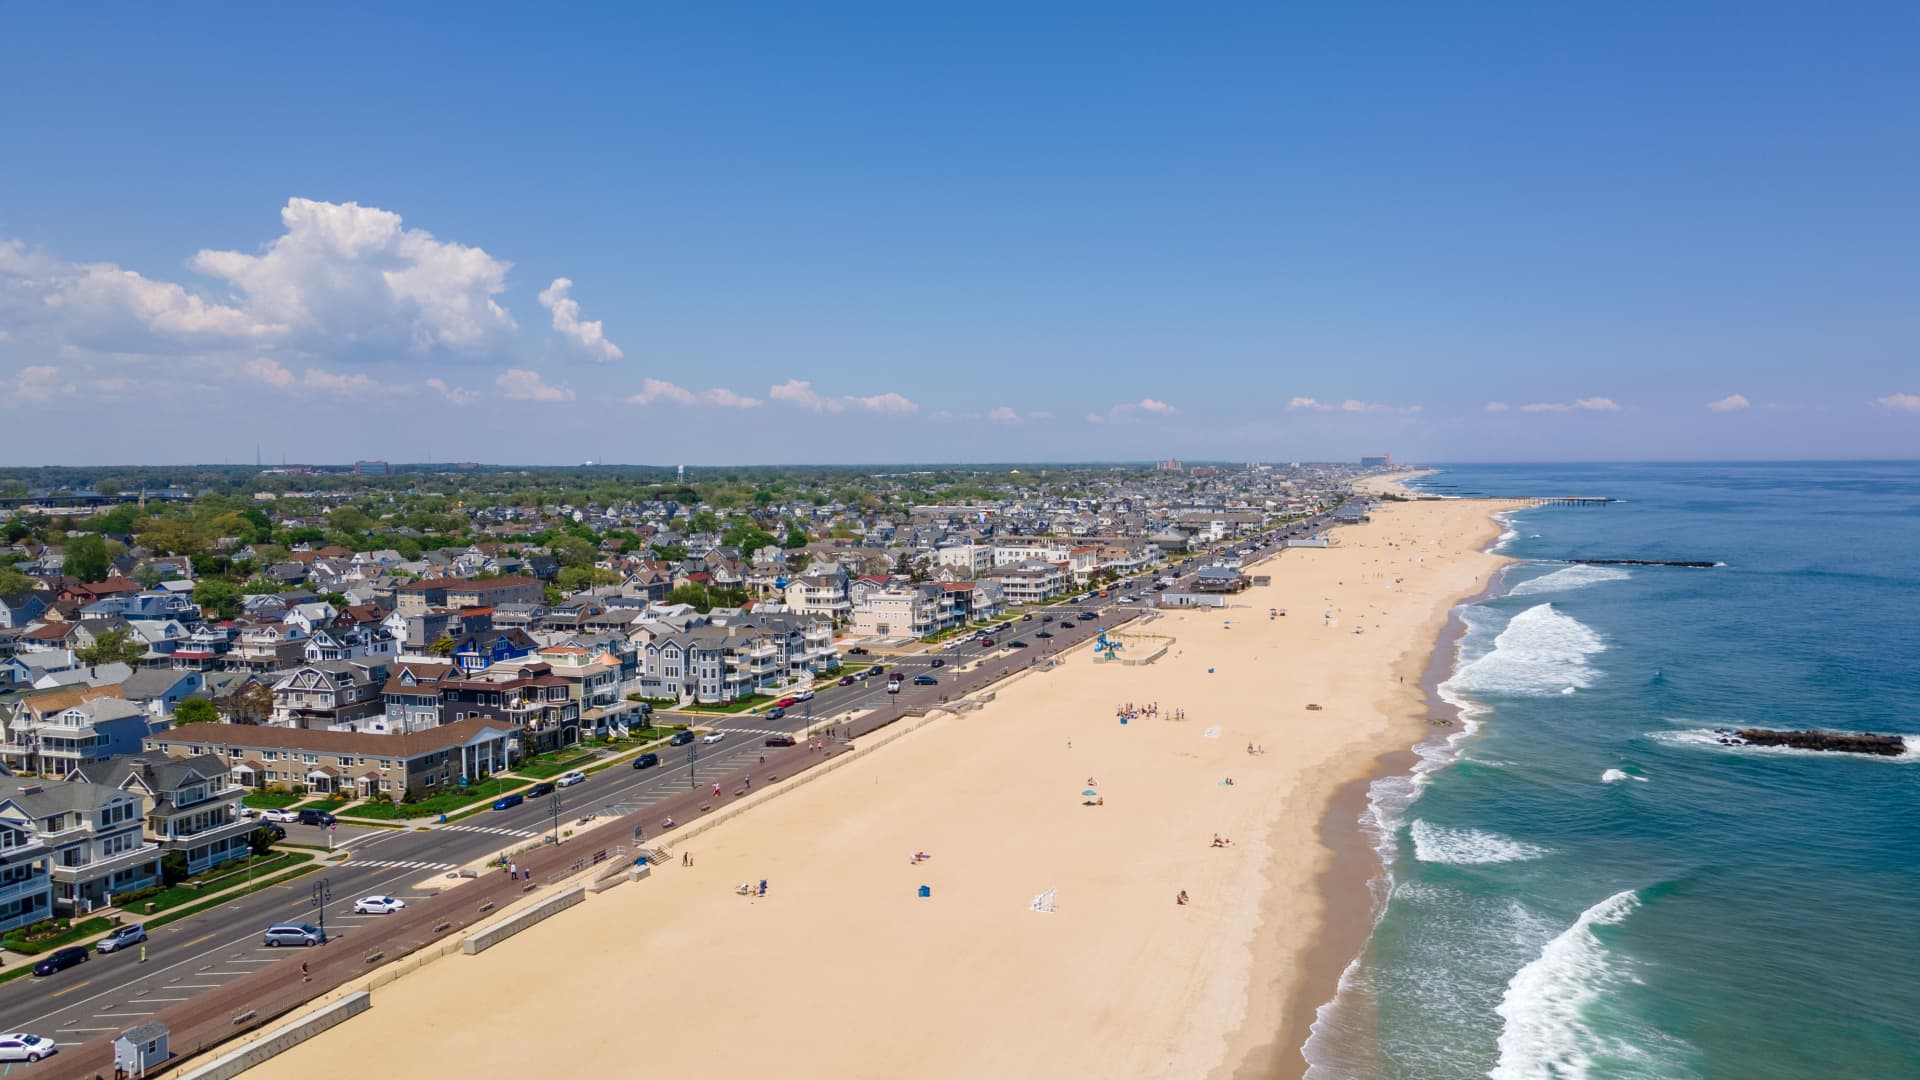 New Jersey ranked as the No. 2 state with the highest average monthly mortgage, according to doxo.